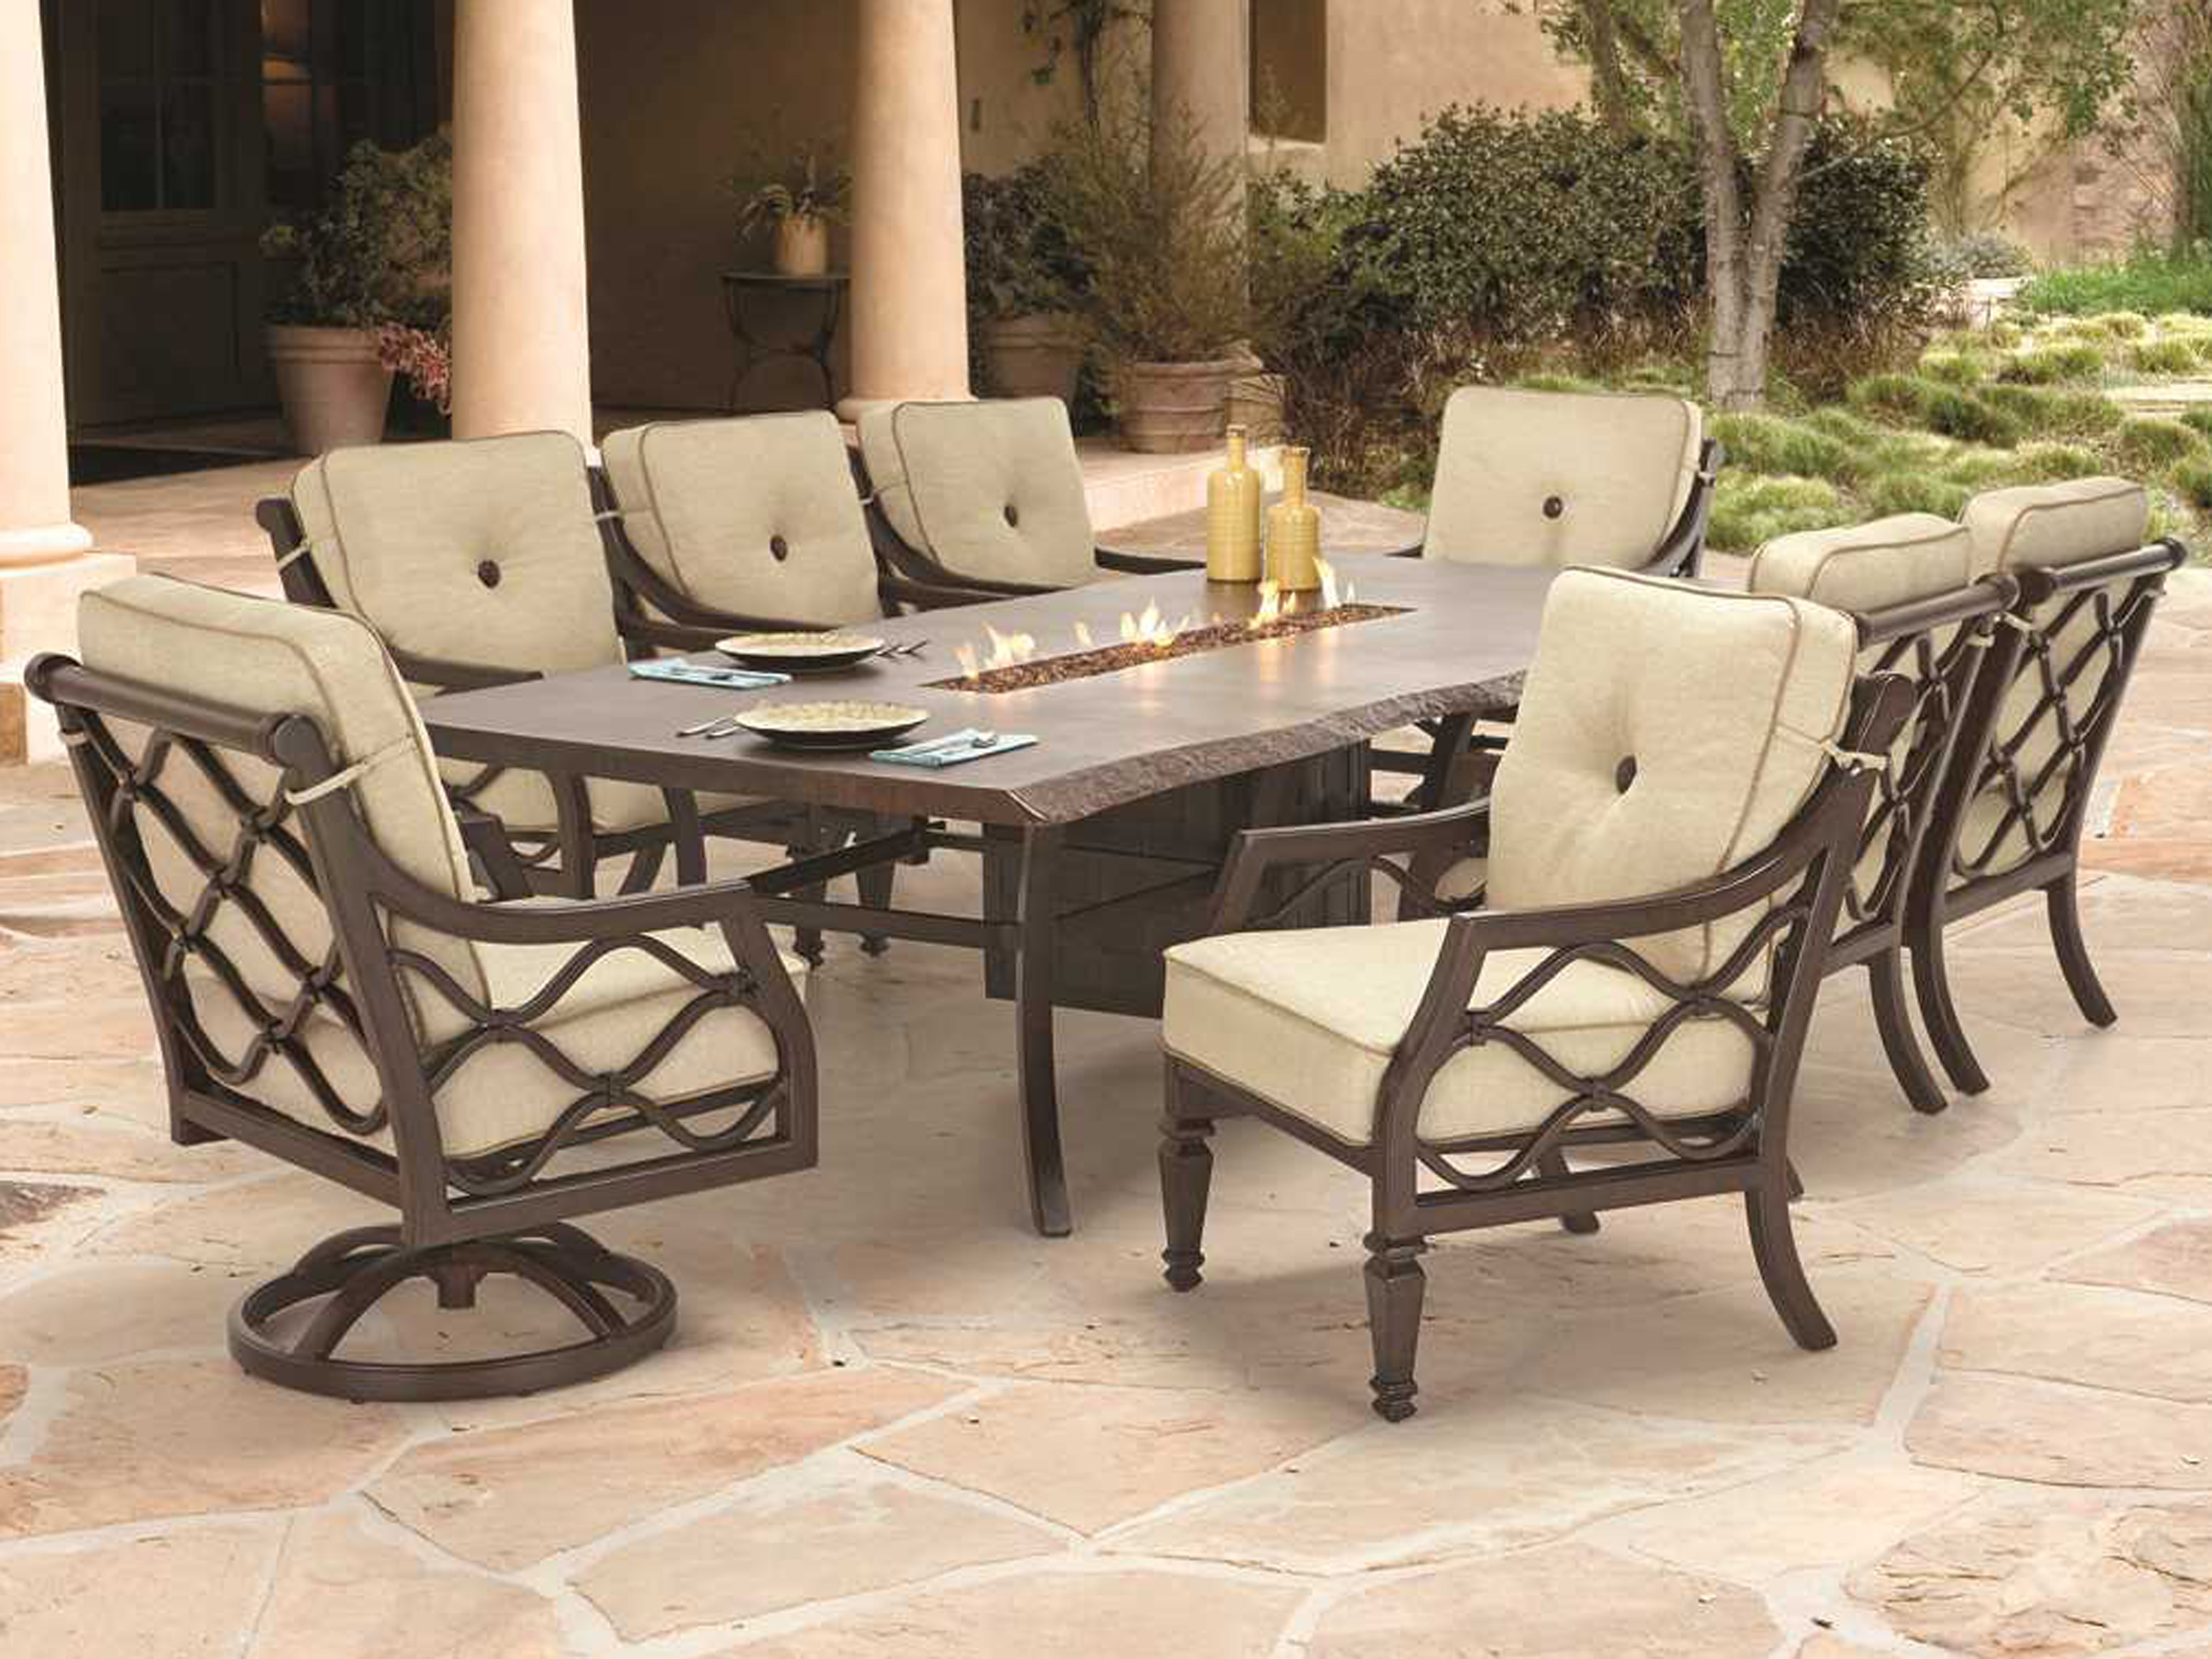 Castelle Villa Bianca Cushion Cast, Patio Dining Table With Fire Pit In The Middle